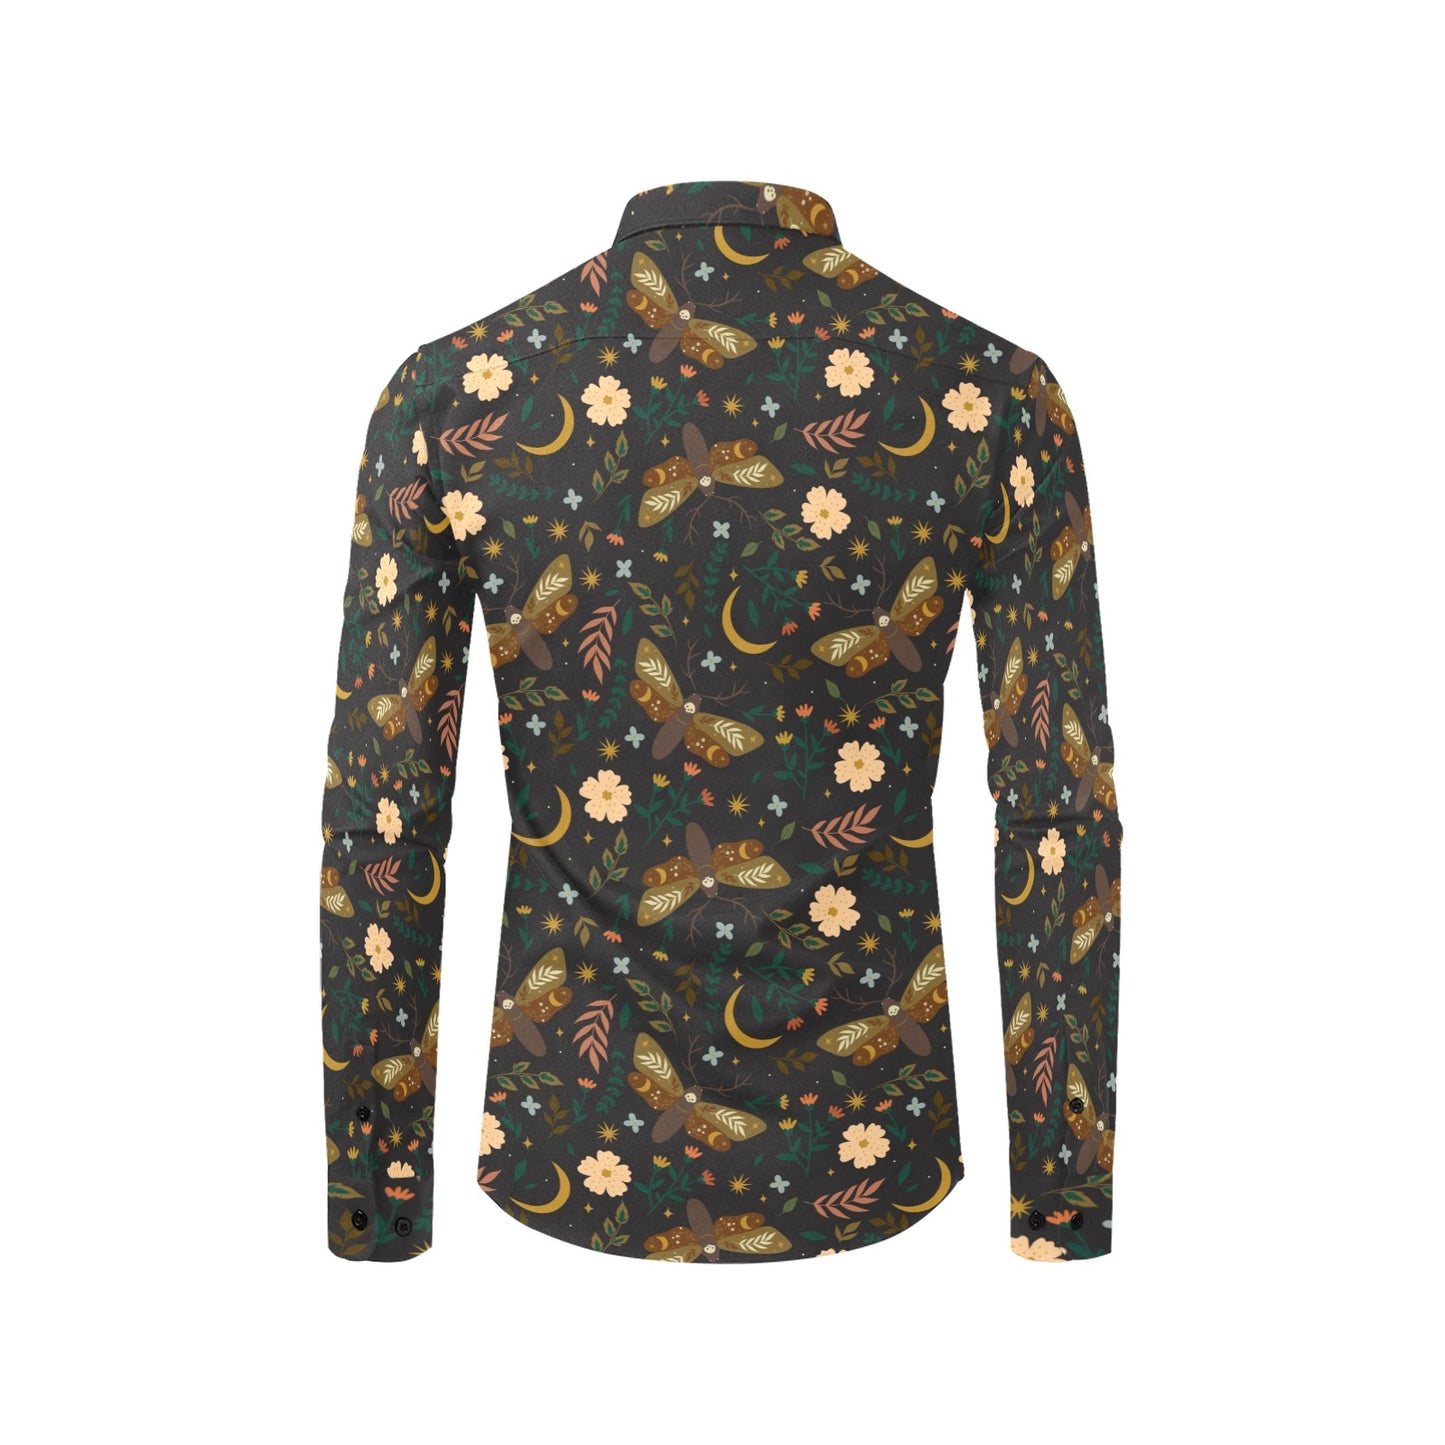 Moth and Flowers long sleeve button-up shirt